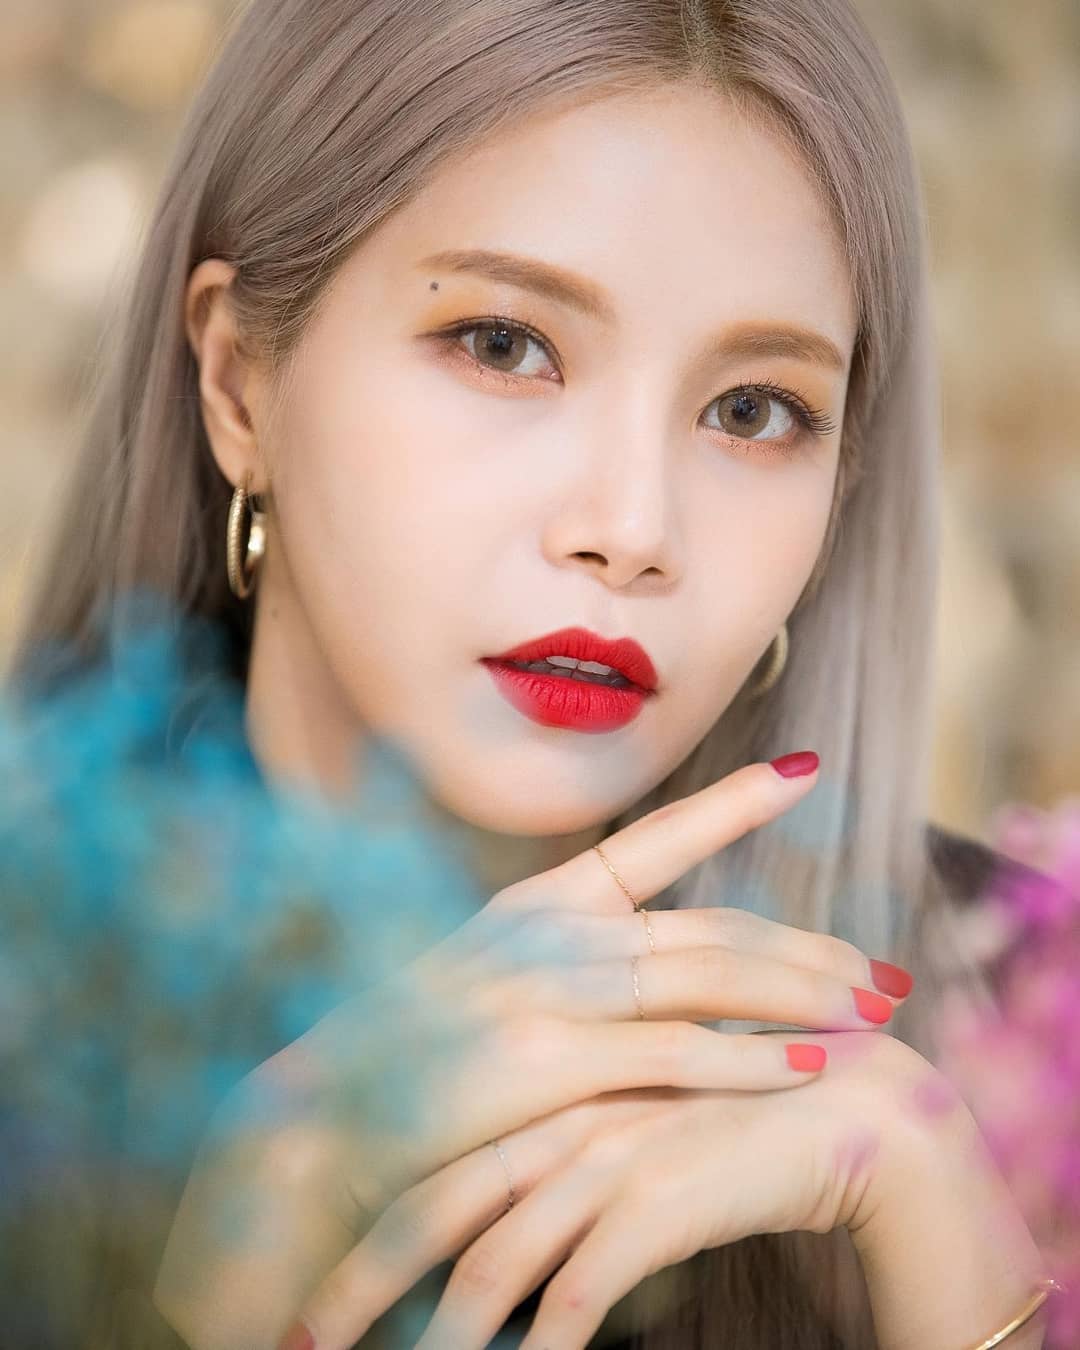 Mamamoo Solar releases its first single in six years since its debut